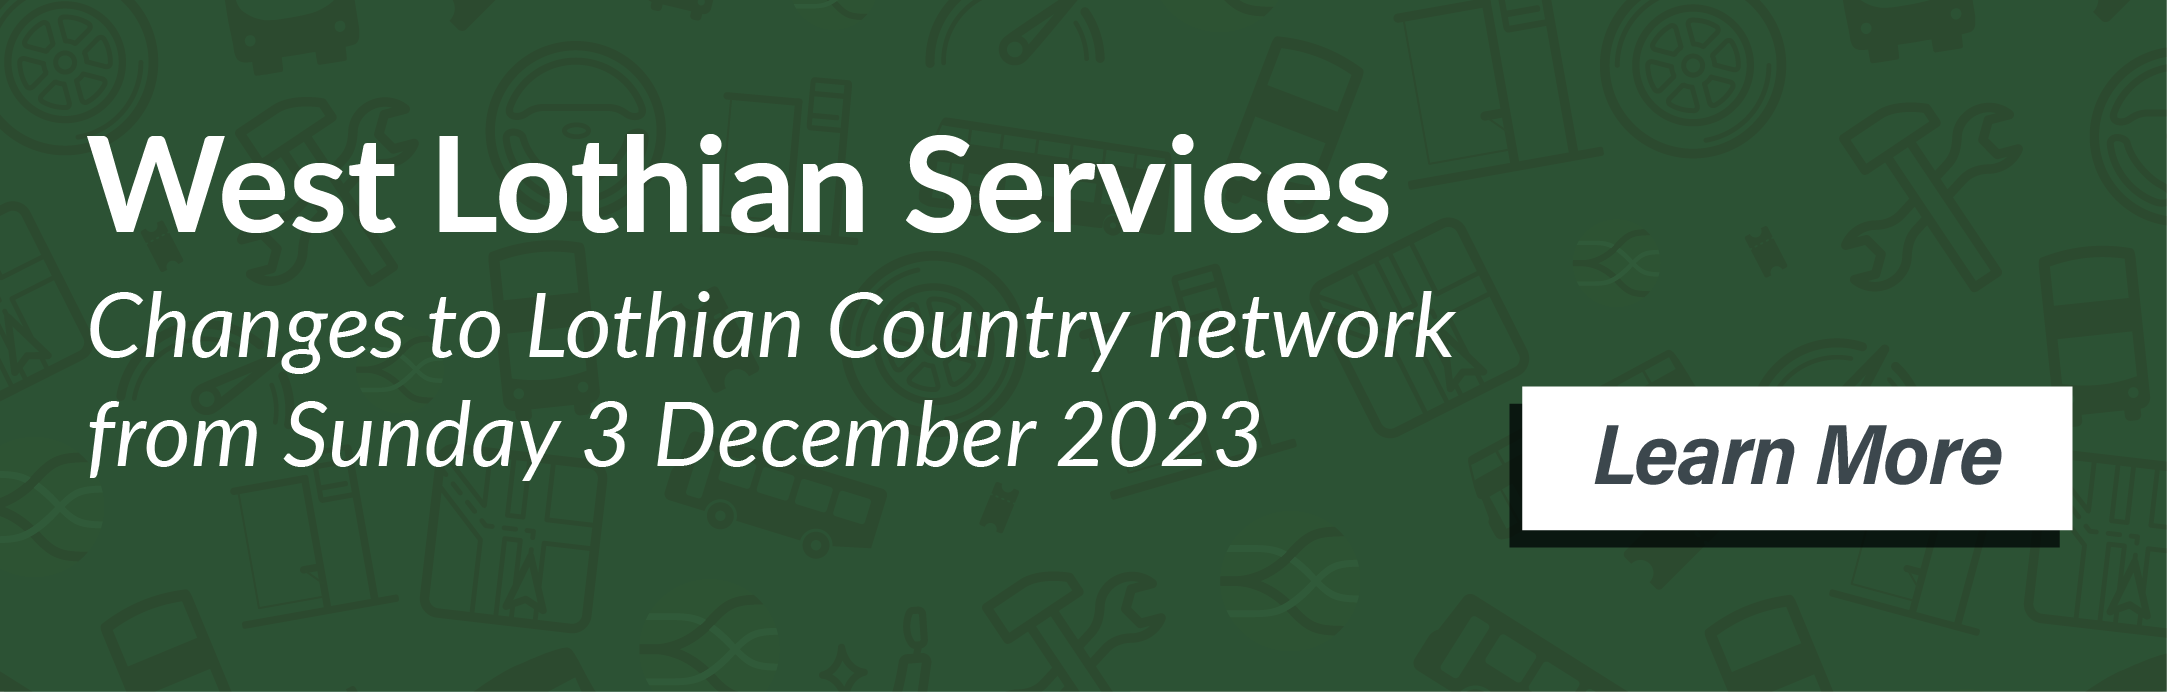 West Lothian Services. Changes to Lothian Country network from Sunday 3 December 2023. Learn More.